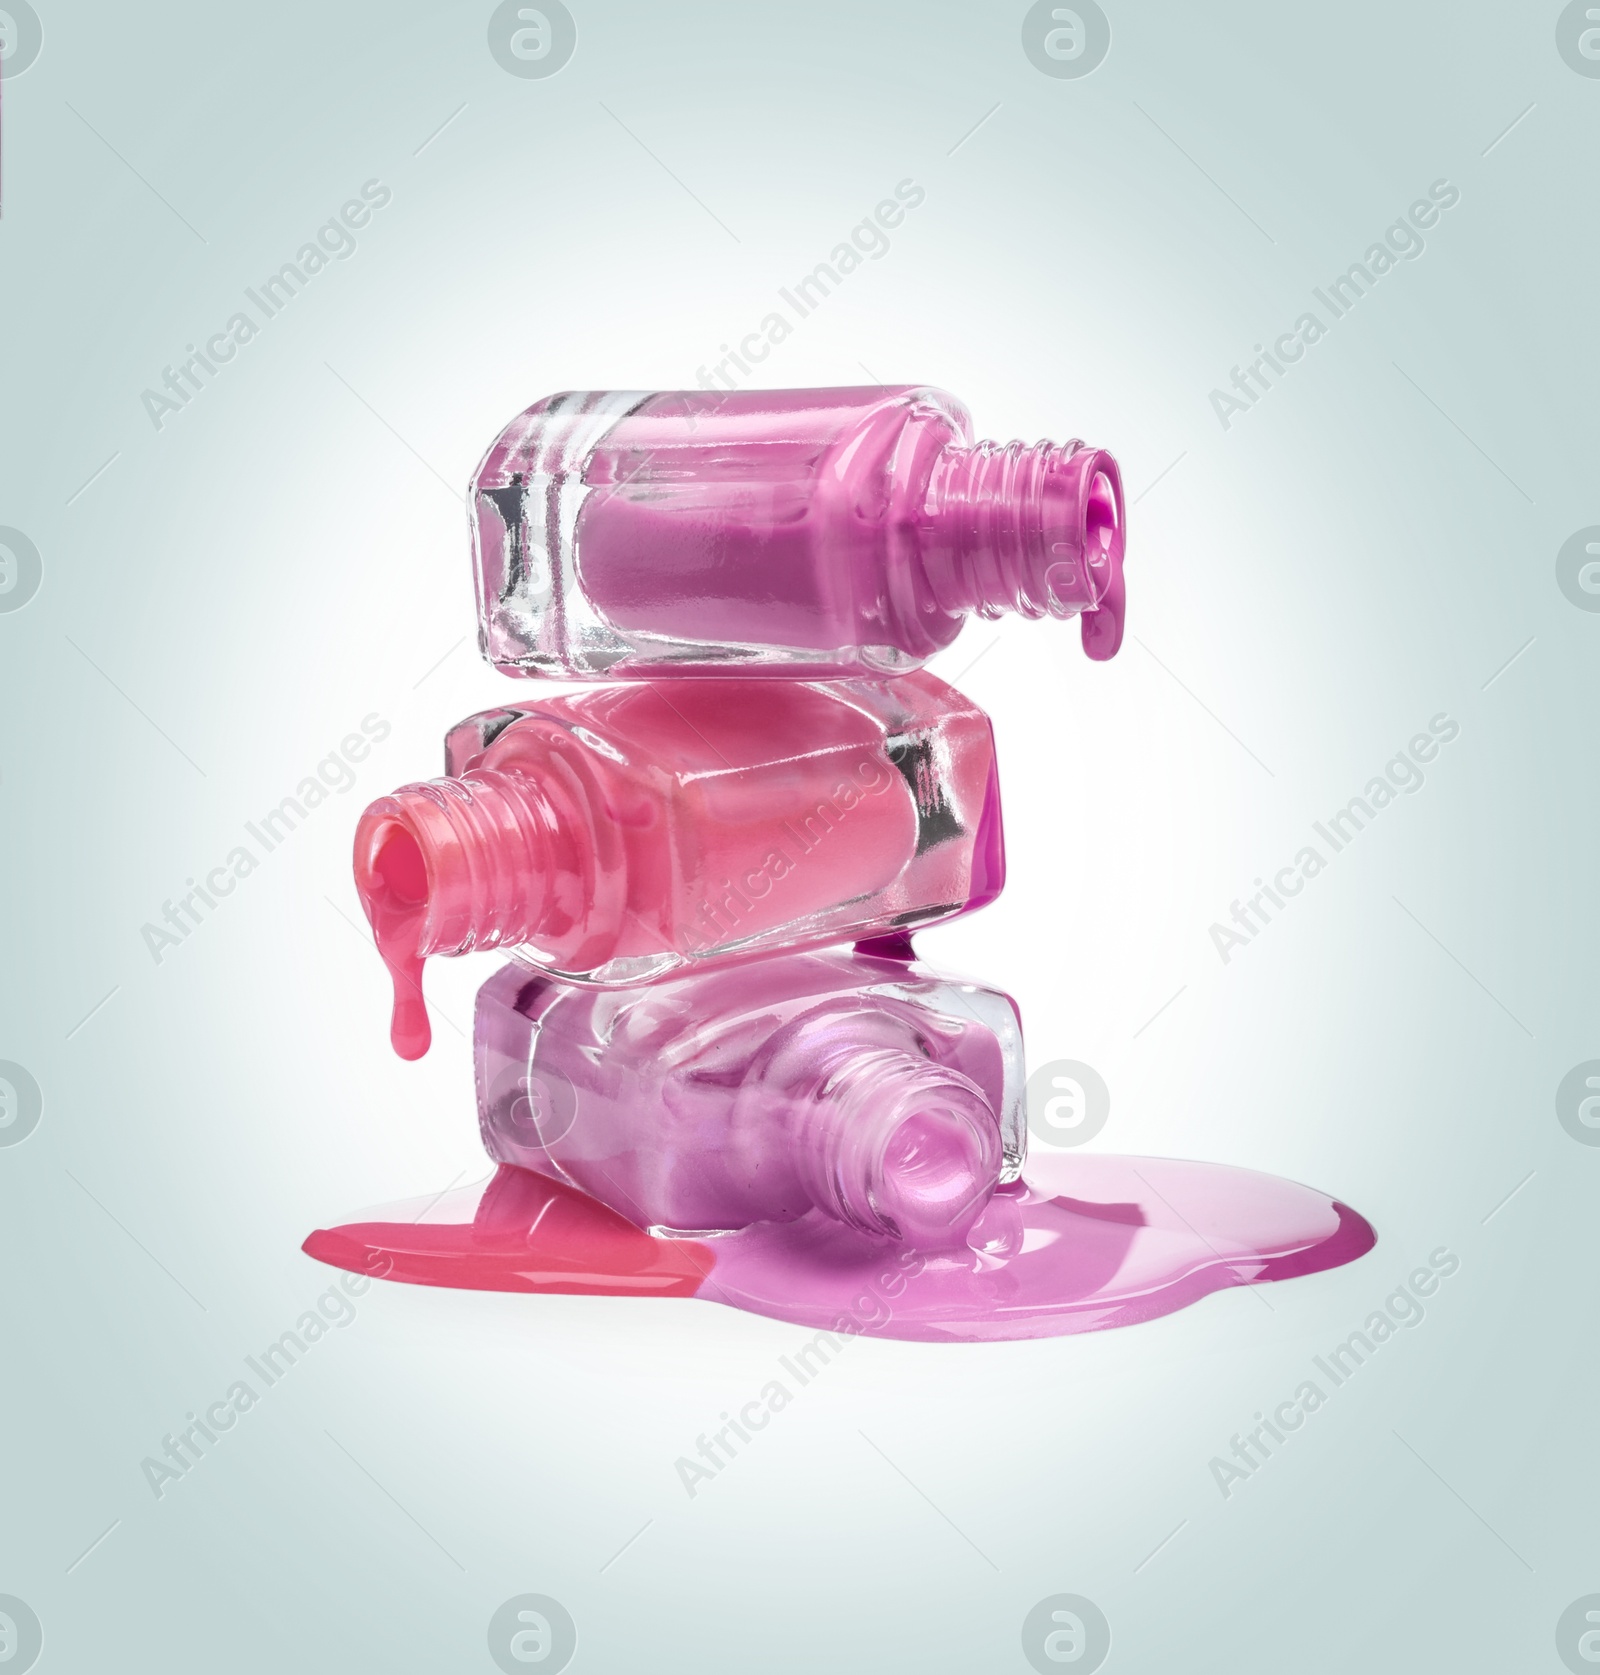 Image of Different nail polishes dripping from open bottles on light background